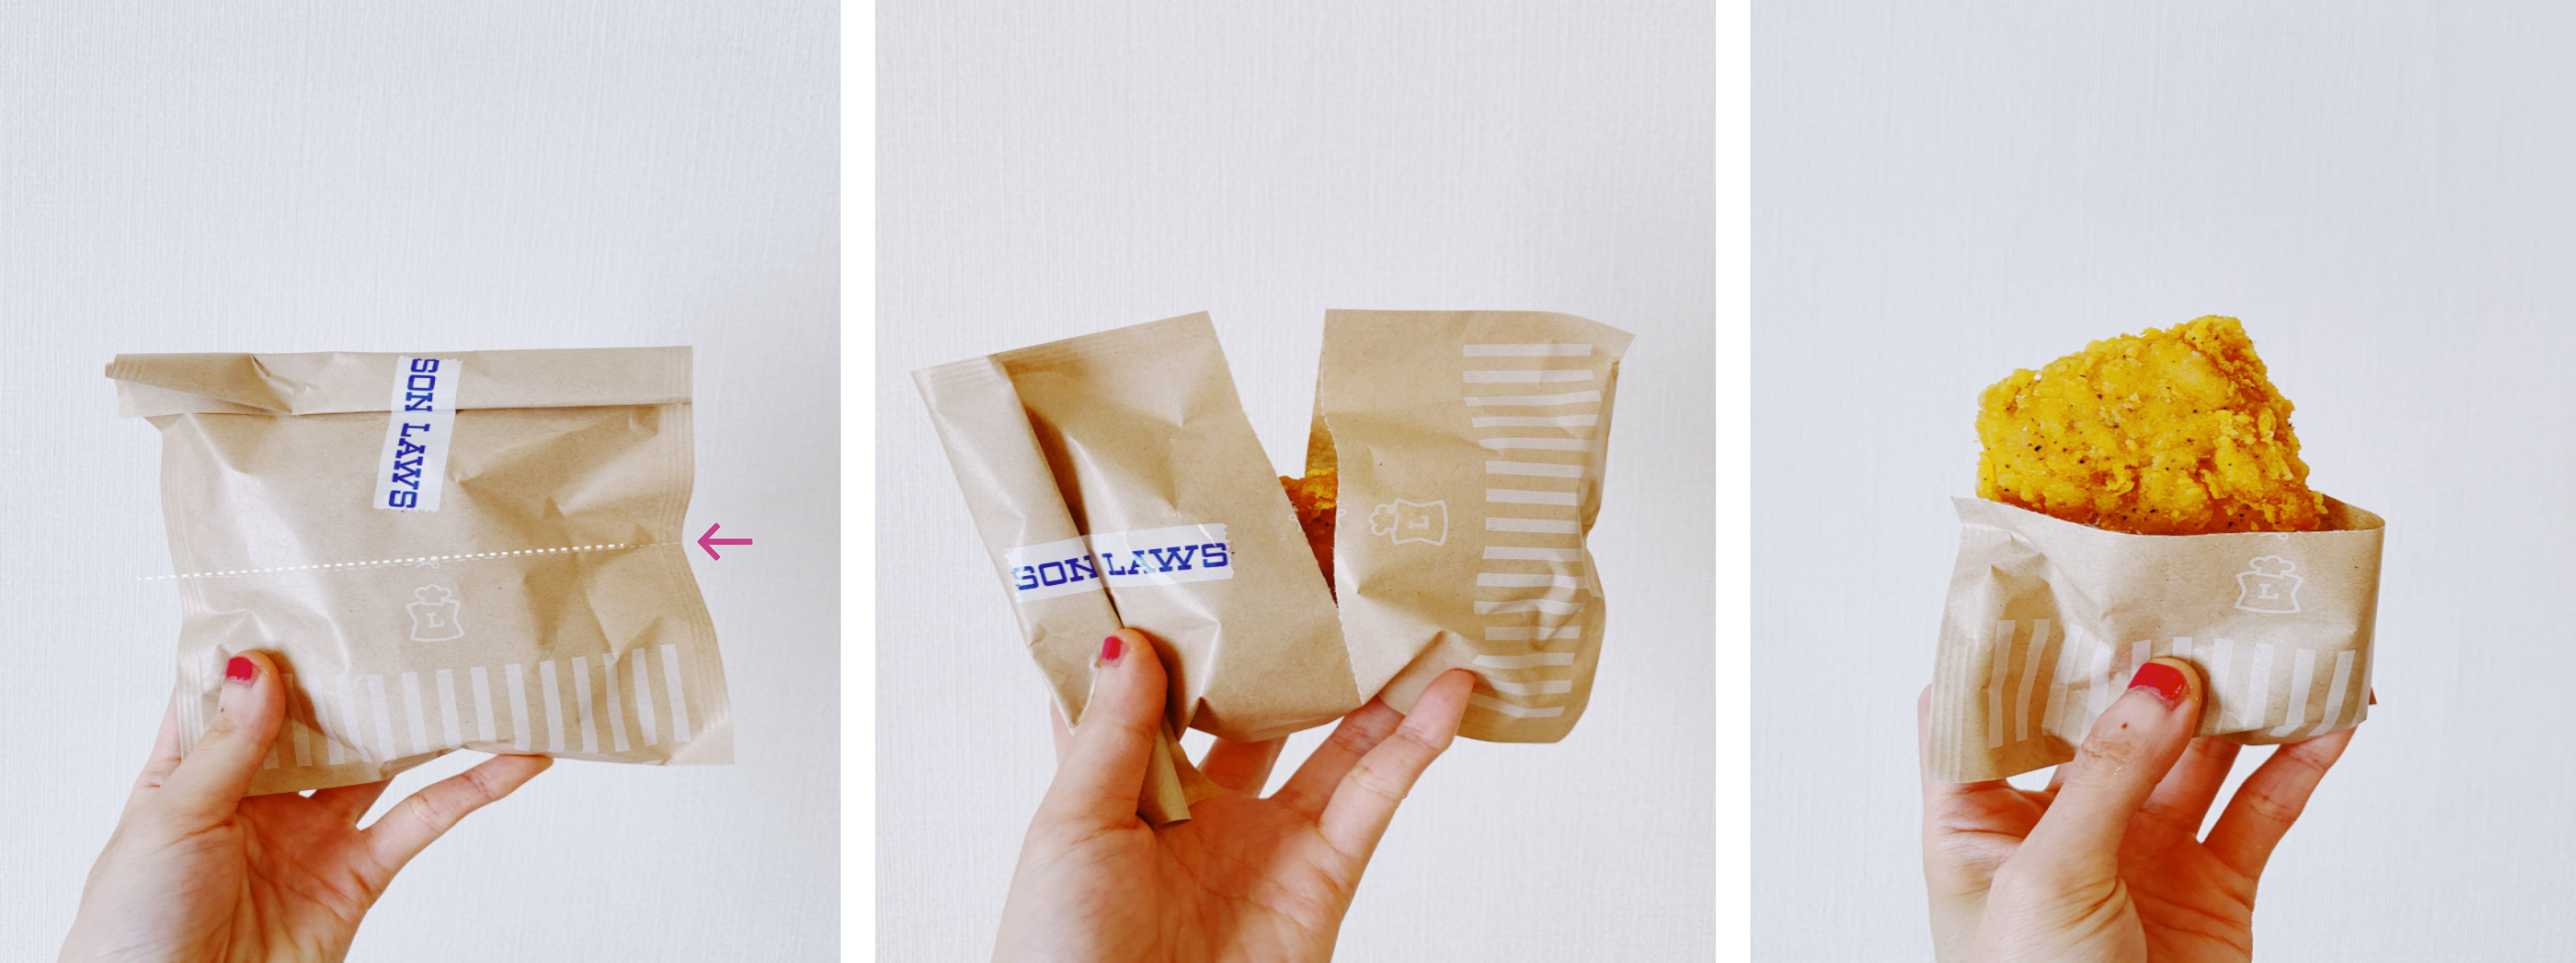 L-R, One: Photograph of a hand holding a paper bag, sealed with Lawson’s label tape. Two: Photograph of a hand holding a half-open paper bag with a piece of fried chicken inside. Three: Photograph of a hand holding half a paper bag with a piece of fried chicken sticking out.L-R, One: Photograph of a hand holding a paper bag, sealed with Lawson’s label tape. Two: Photograph of a hand holding a half-open paper bag with a piece of fried chicken inside. Three: Photograph of a hand holding half a paper bag with a piece of fried chicken sticking out.